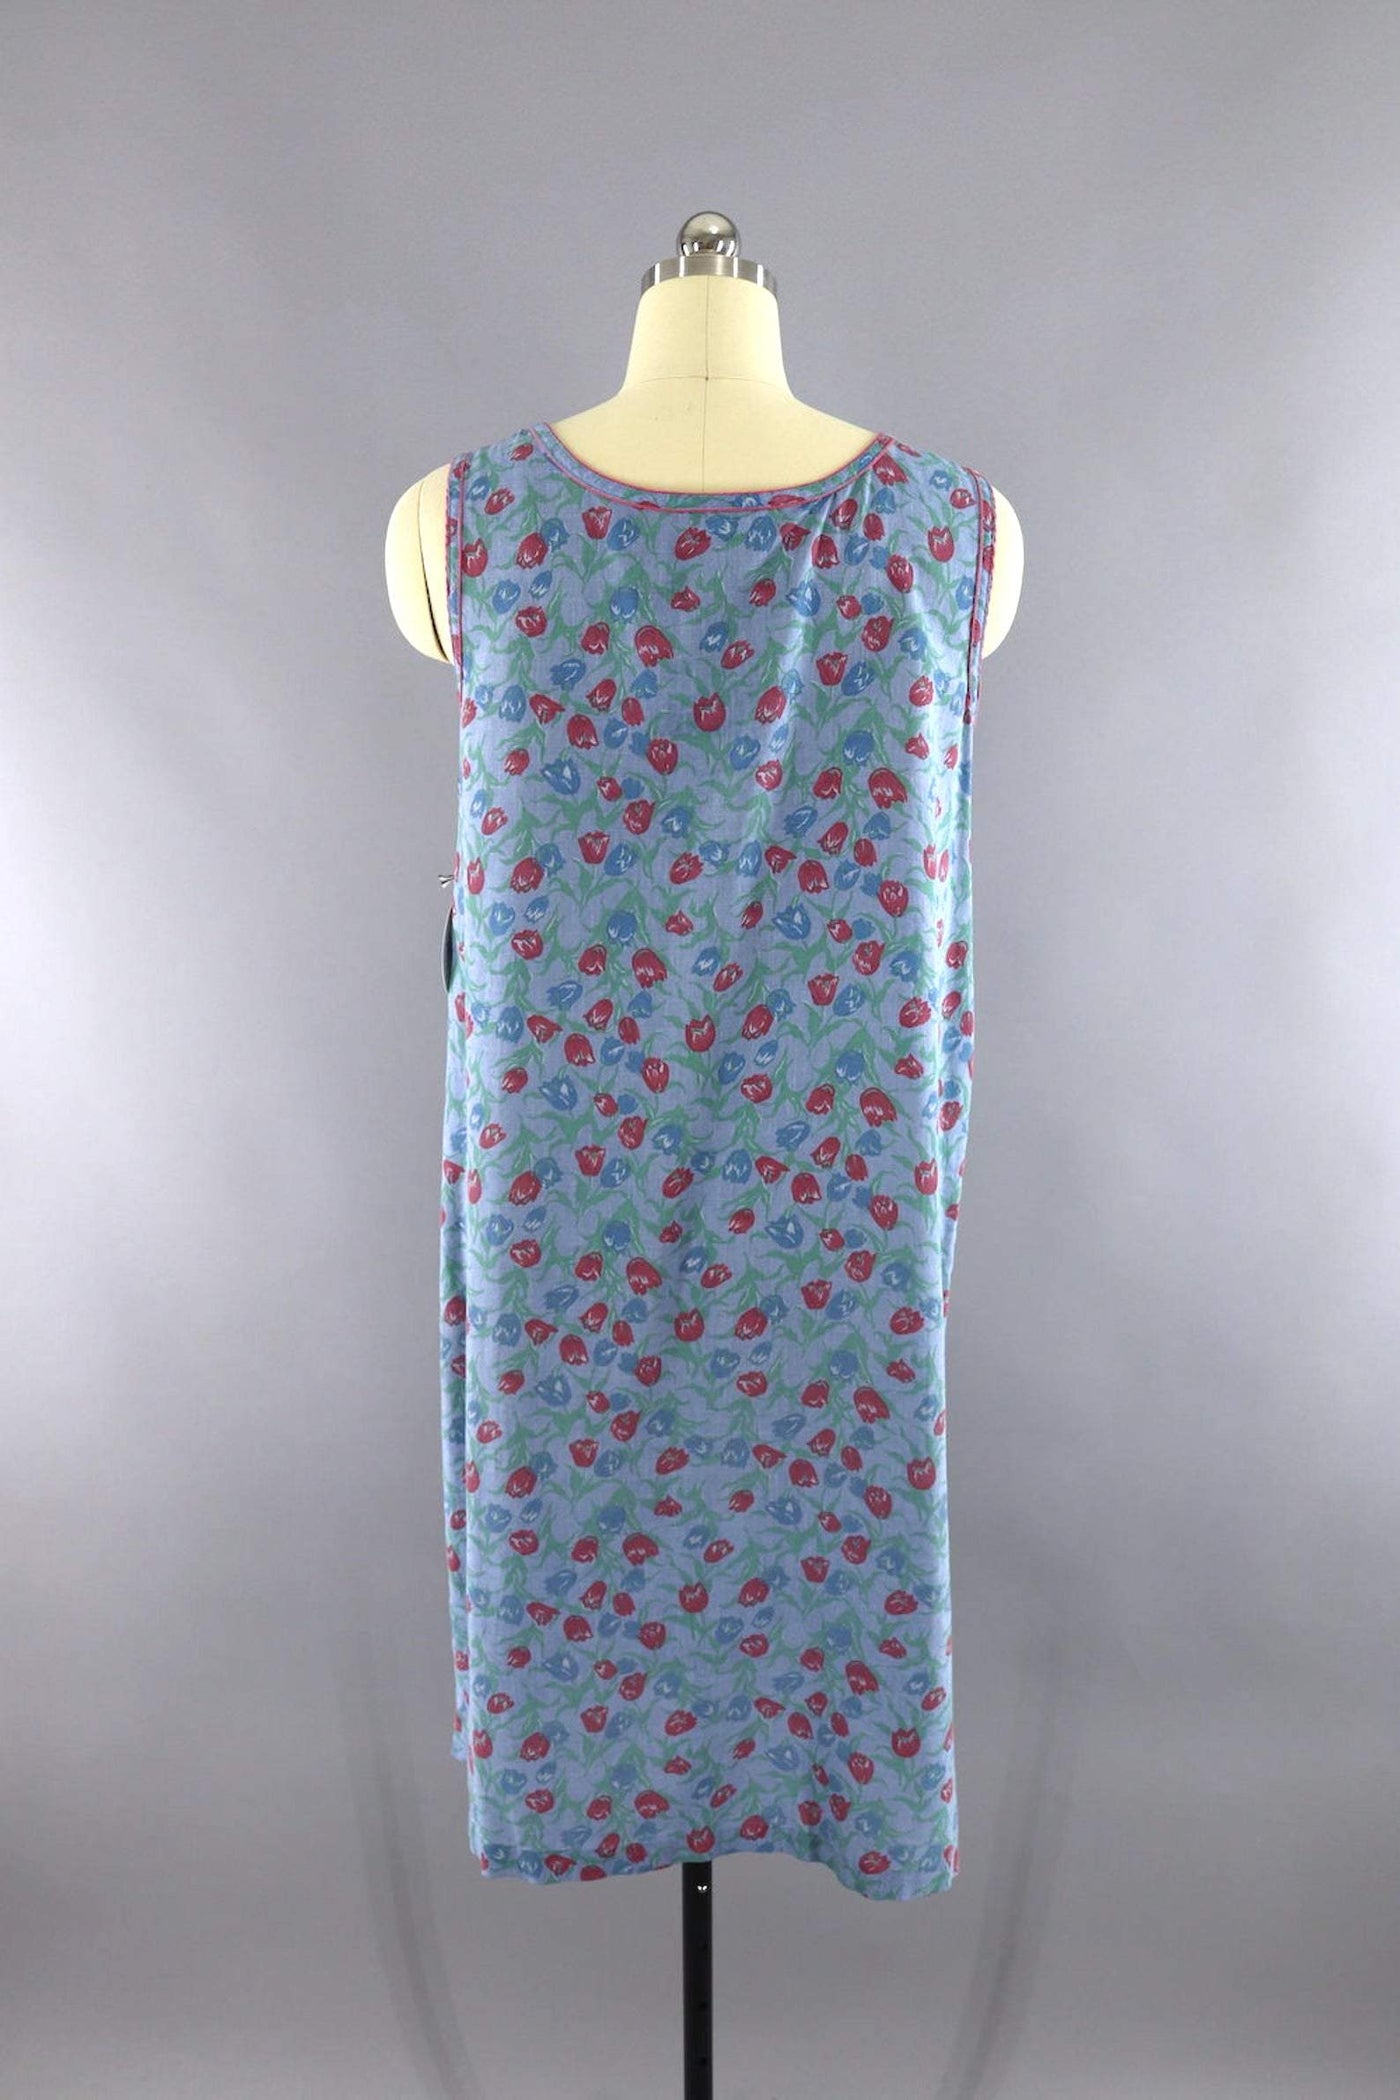 Vintage Chambray Floral Print House Dress-ThisBlueBird